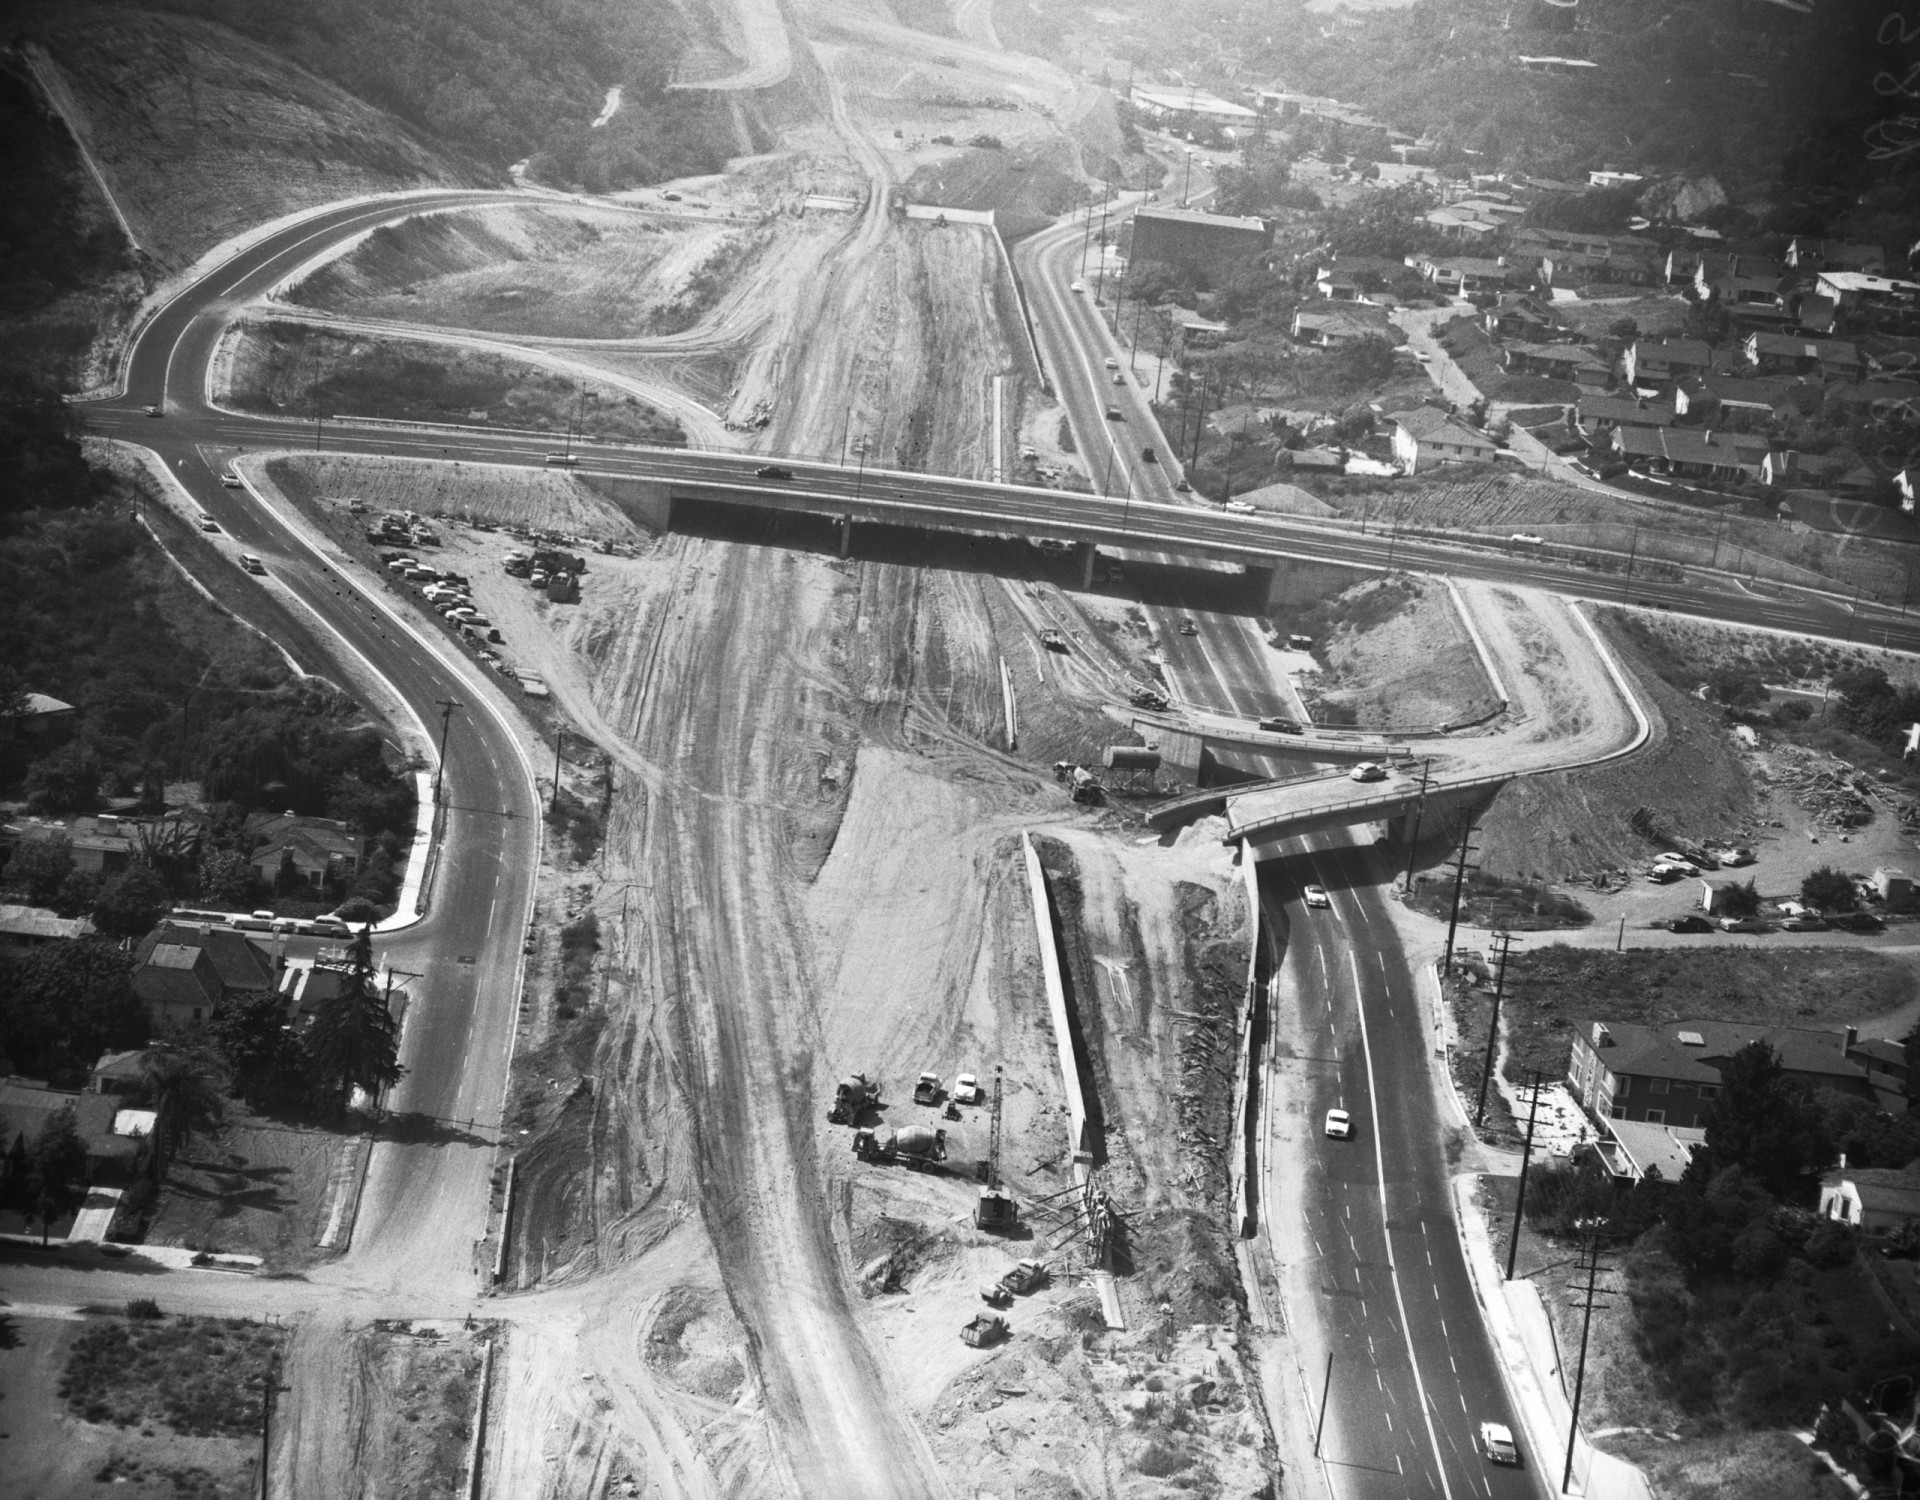 <p>Inevitably perhaps, the project's timescale and budget was vastly underestimated. It ended up costing US$114 billion, or $618 billion today's money, and took 35 years to complete. Pictured under construction in 1956 is the San Diego freeway.</p><p>You may also like:<a href="https://www.starsinsider.com/n/416870?utm_source=msn.com&utm_medium=display&utm_campaign=referral_description&utm_content=697904en-us"> Celebrities who went back to school after they became famous</a></p>